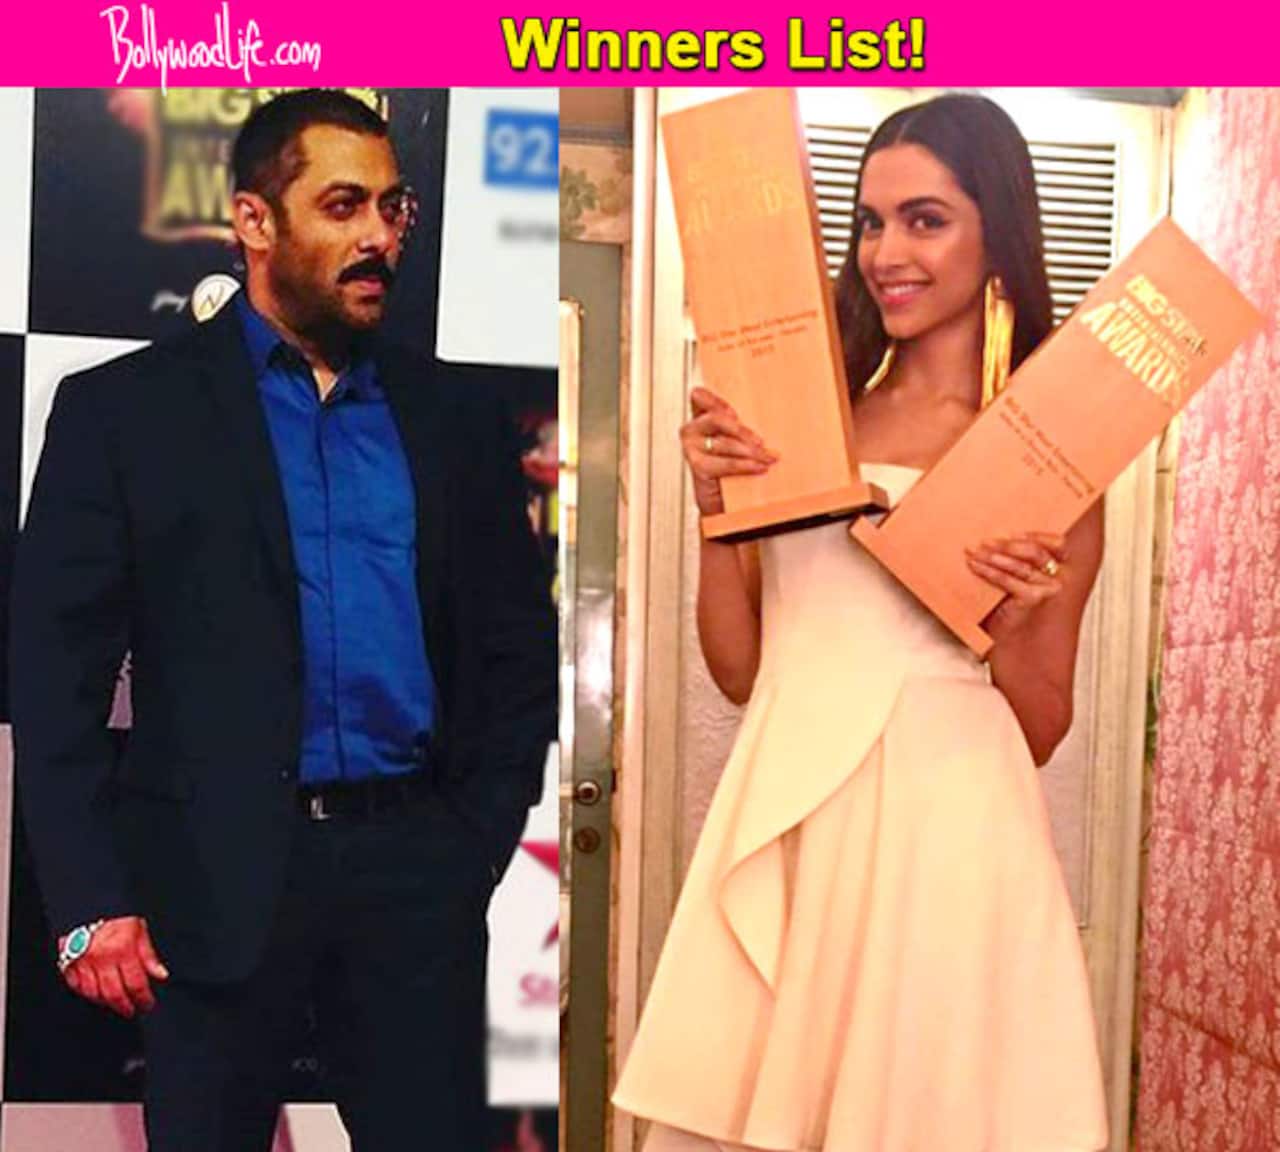 Big Star Entertainment Awards 2015 winners list: Salman Khan and Deepika Padukone declared as the Most Entertaining Actors of the year!